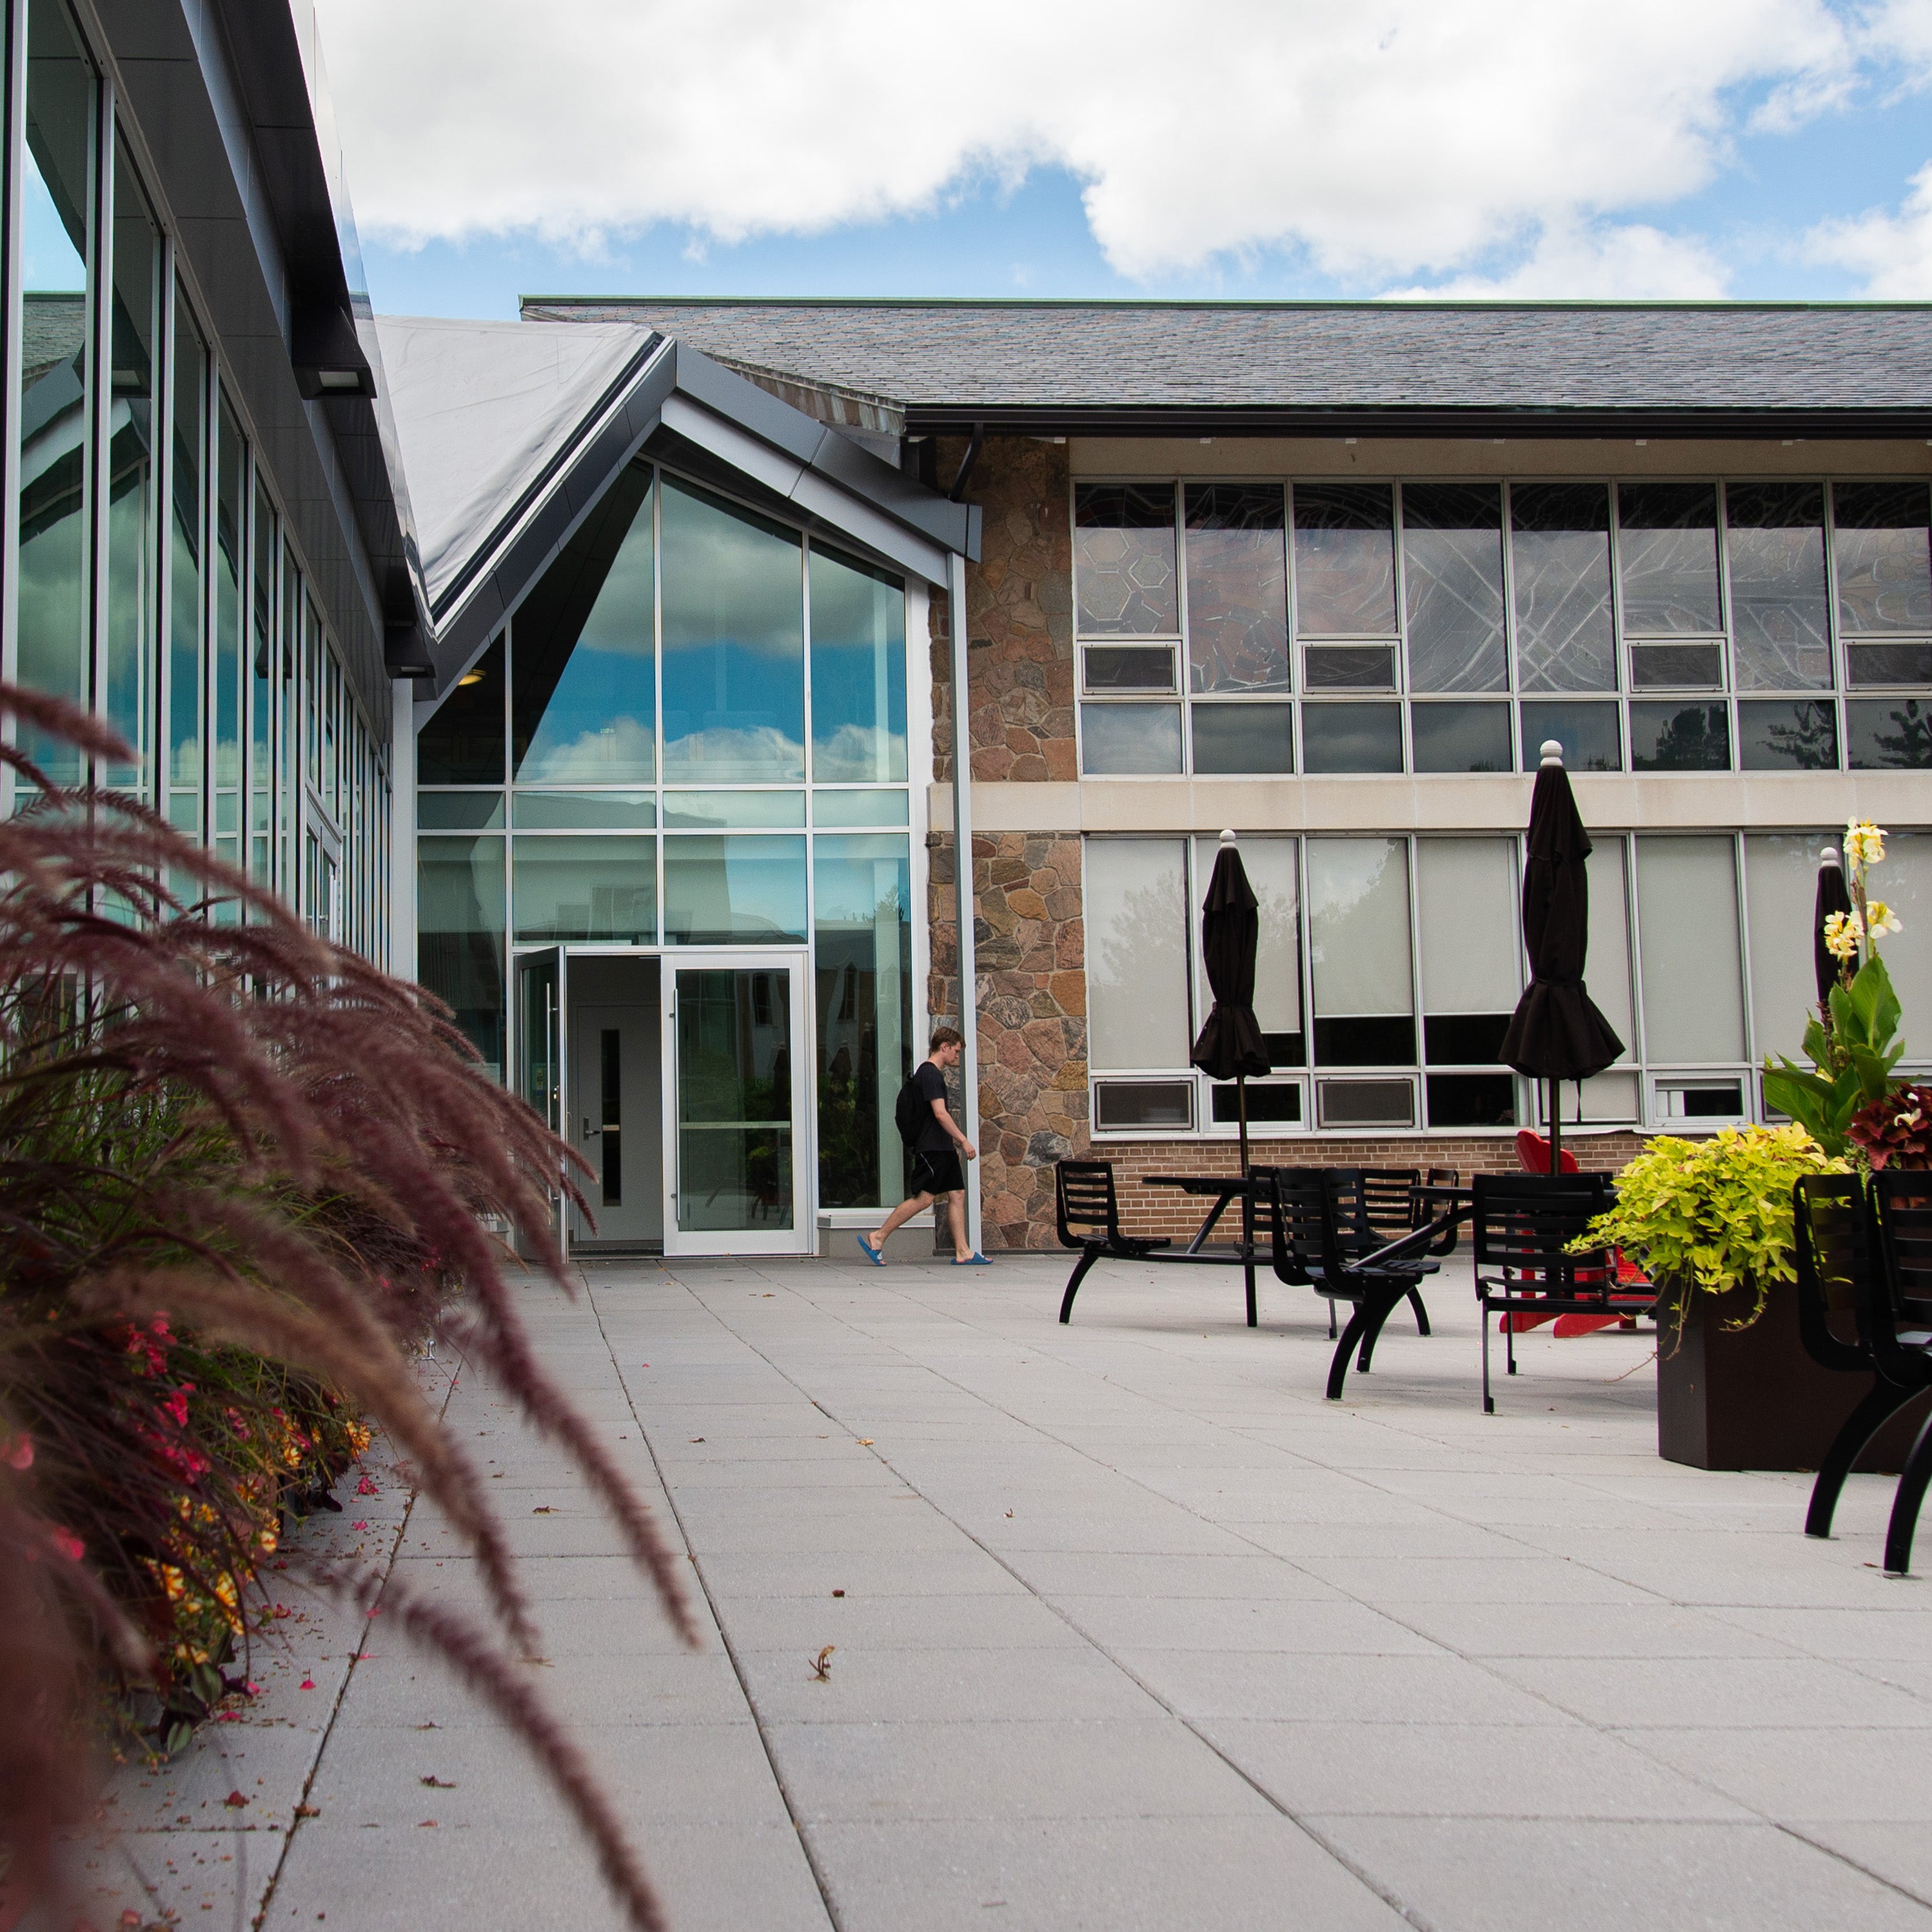 A view of the Grebel patio, facing the entrance to the building, and student services wing.